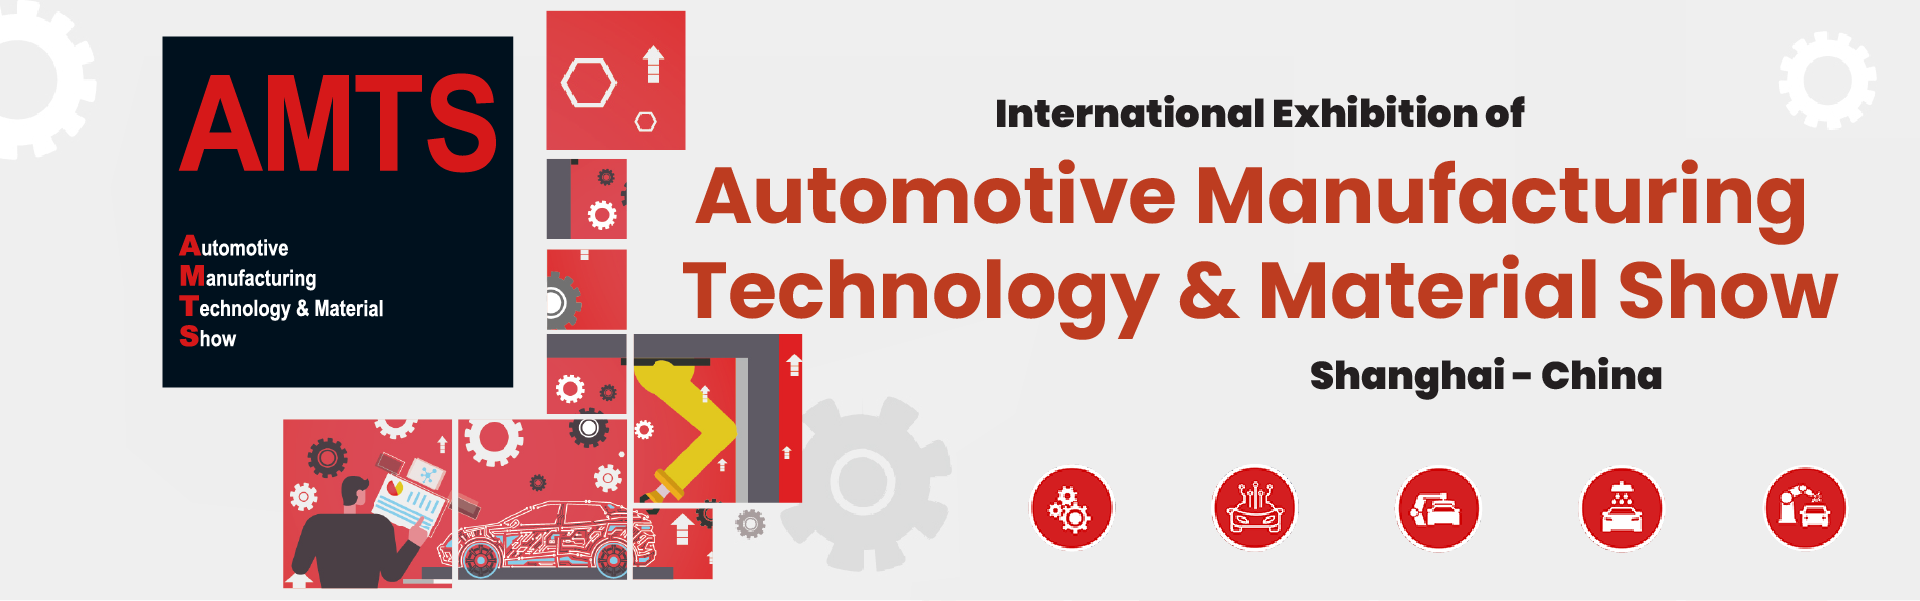 Automotive Manufacturing Technology & Material (AMTS) Exhibition Shanghai